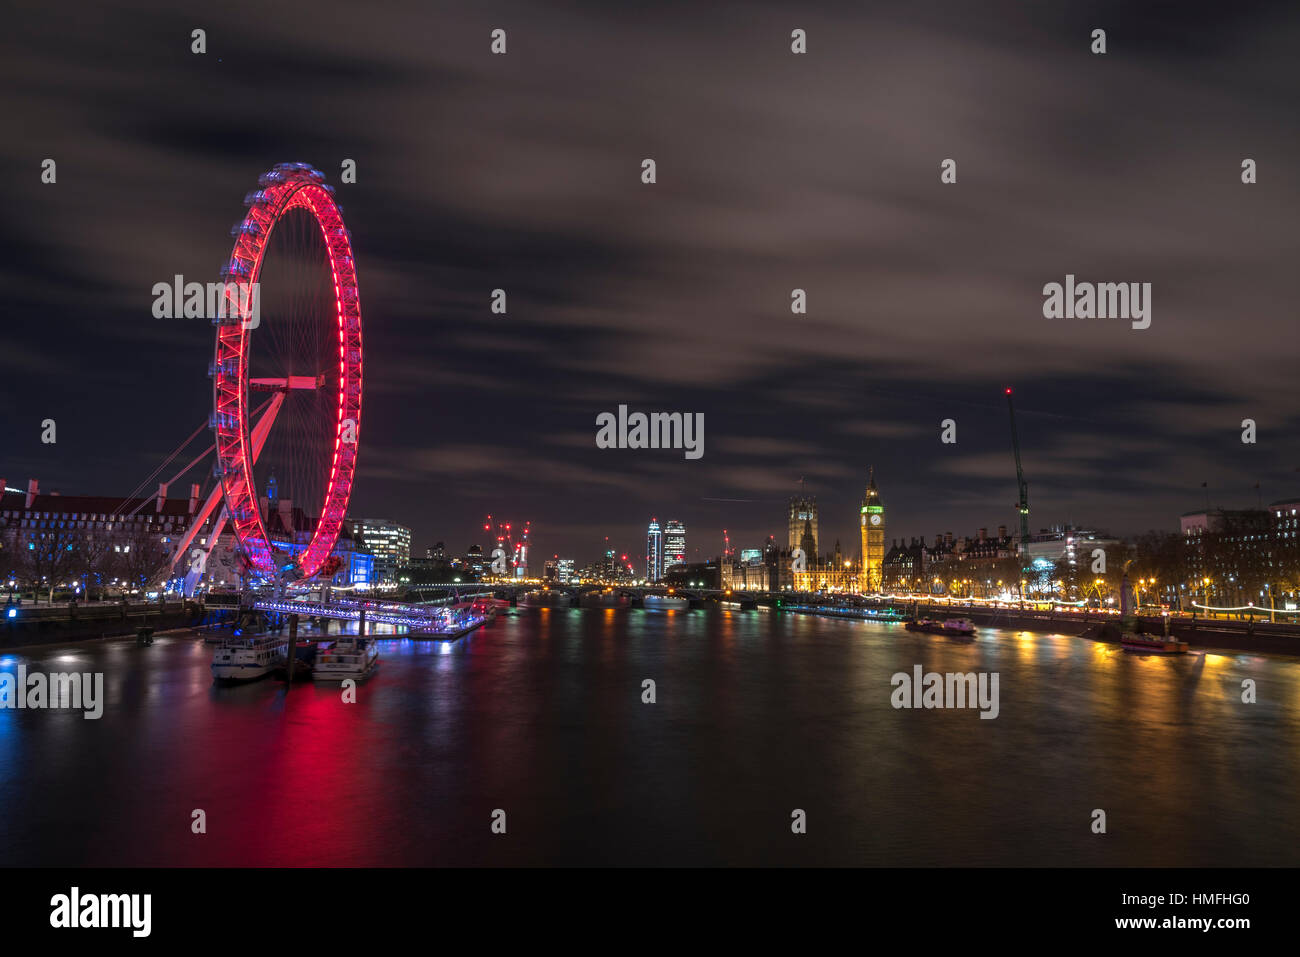 The view of the London Eye, River Thames and Big Ben from the Golden Jubilee Bridge, London, England, United Kingdom Stock Photo